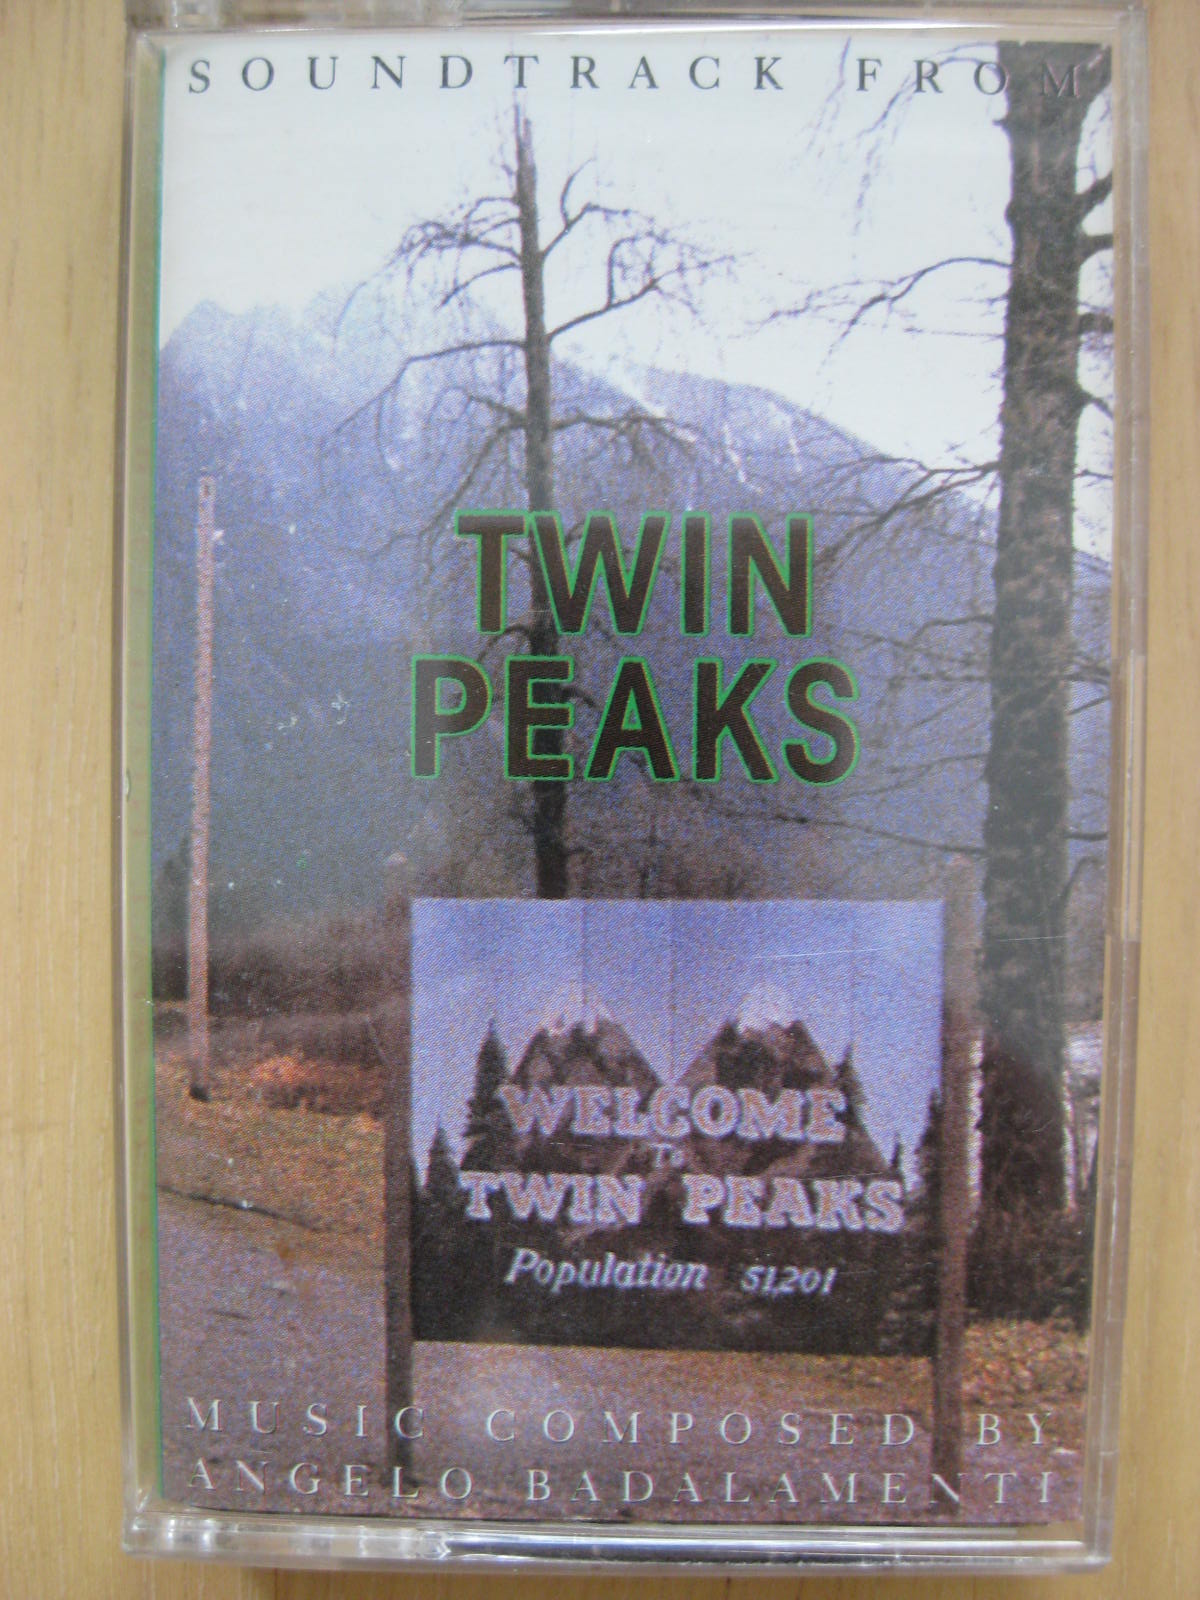 A Cup of Coffee with a Doughnut: Twin Peaks soundtrack, cassette